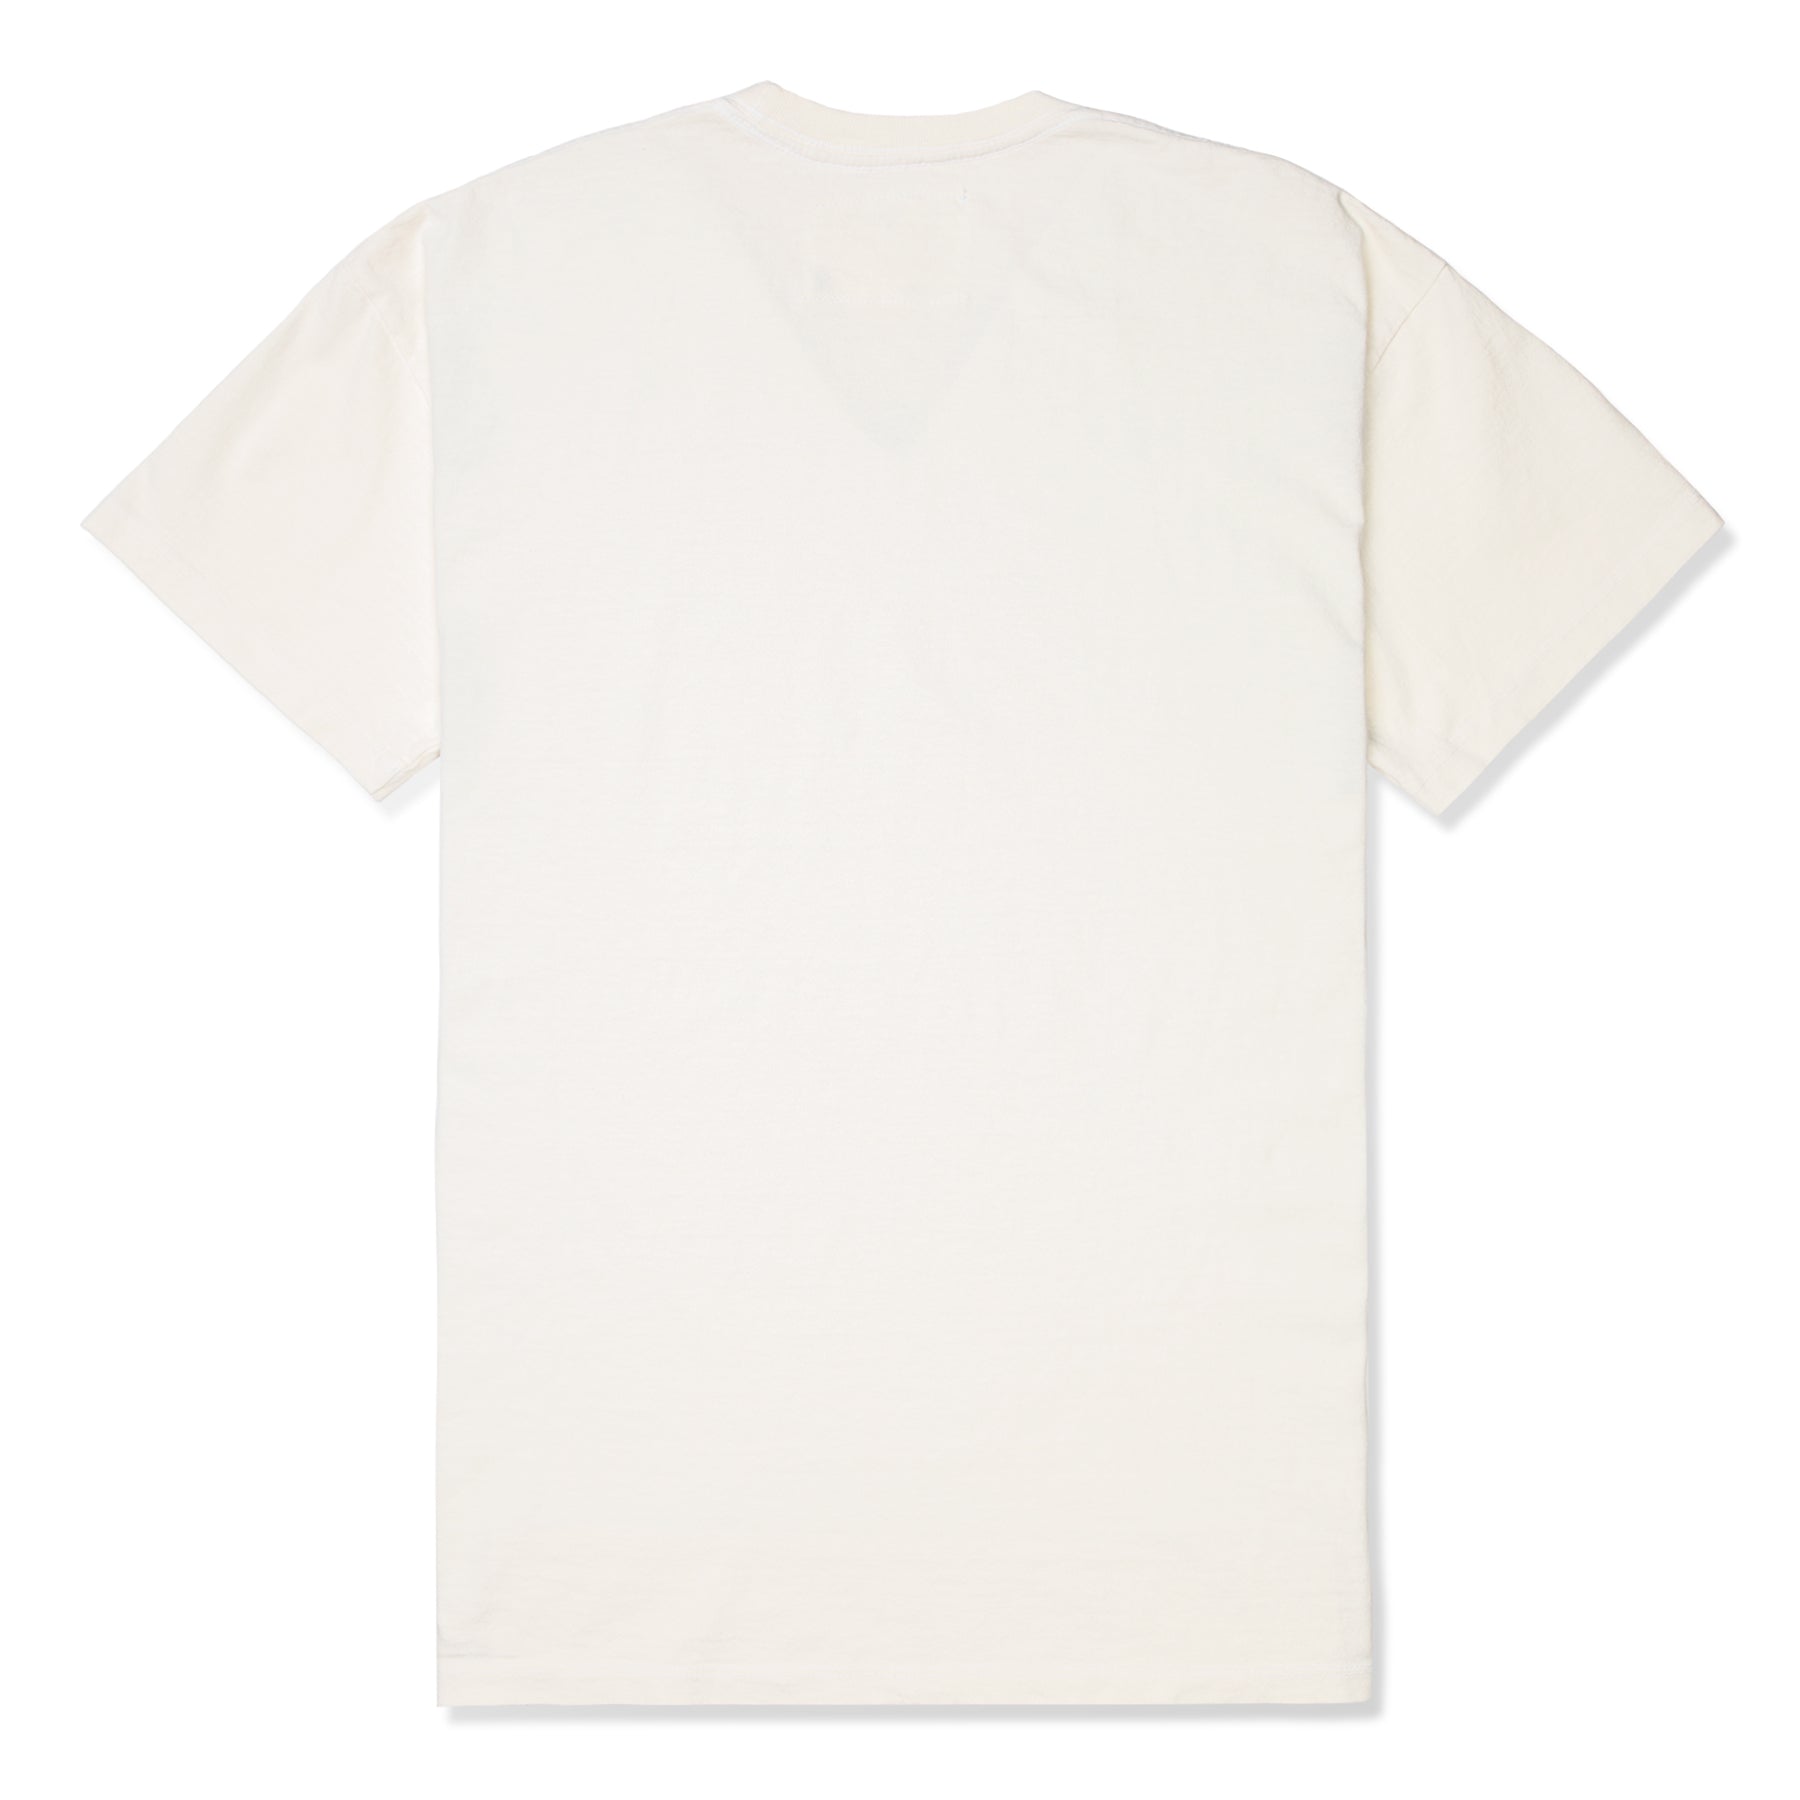 Days – Ends T-Shirt One Concepts of Trail (Off These White)